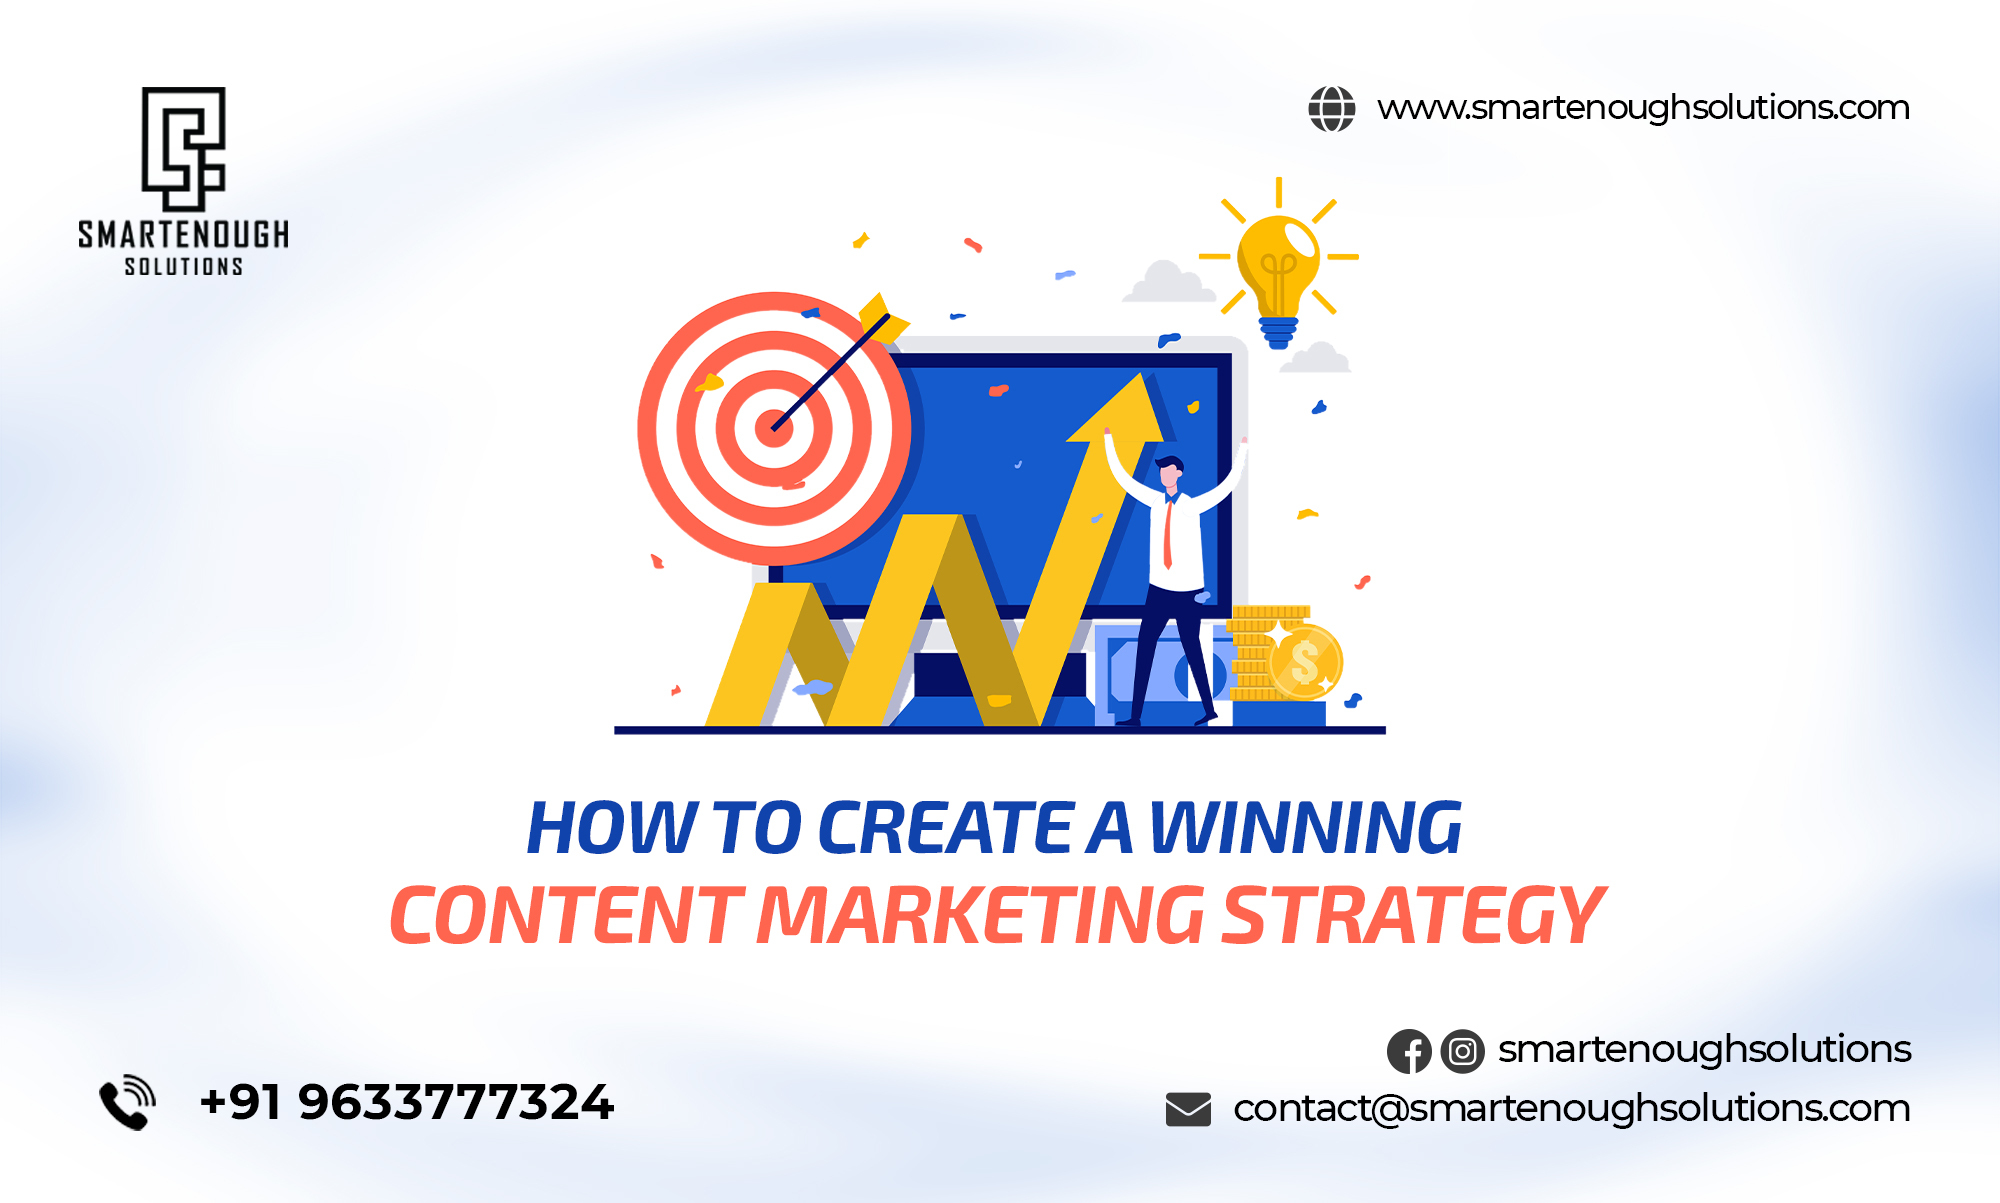 How to Create a Winning Content Marketing Strategy